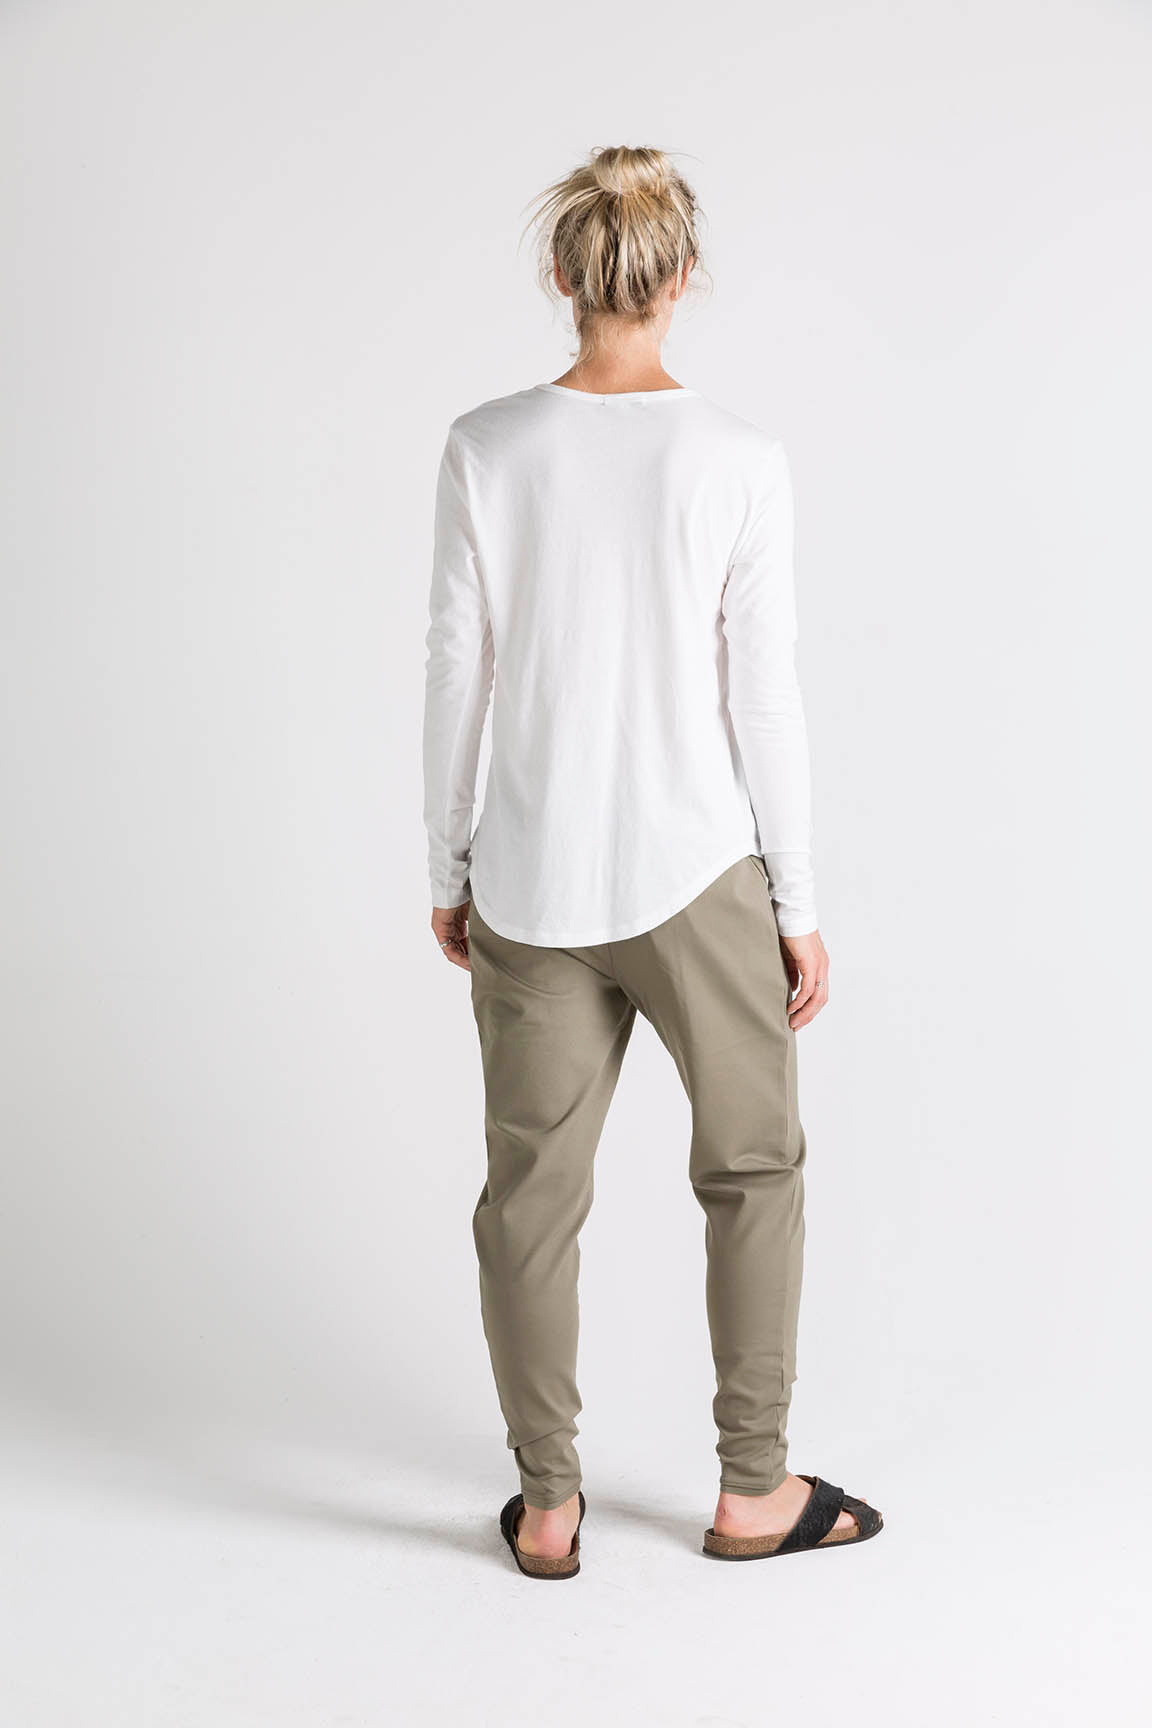 Ophelia and Ryder Long Sleeve T-Shirt